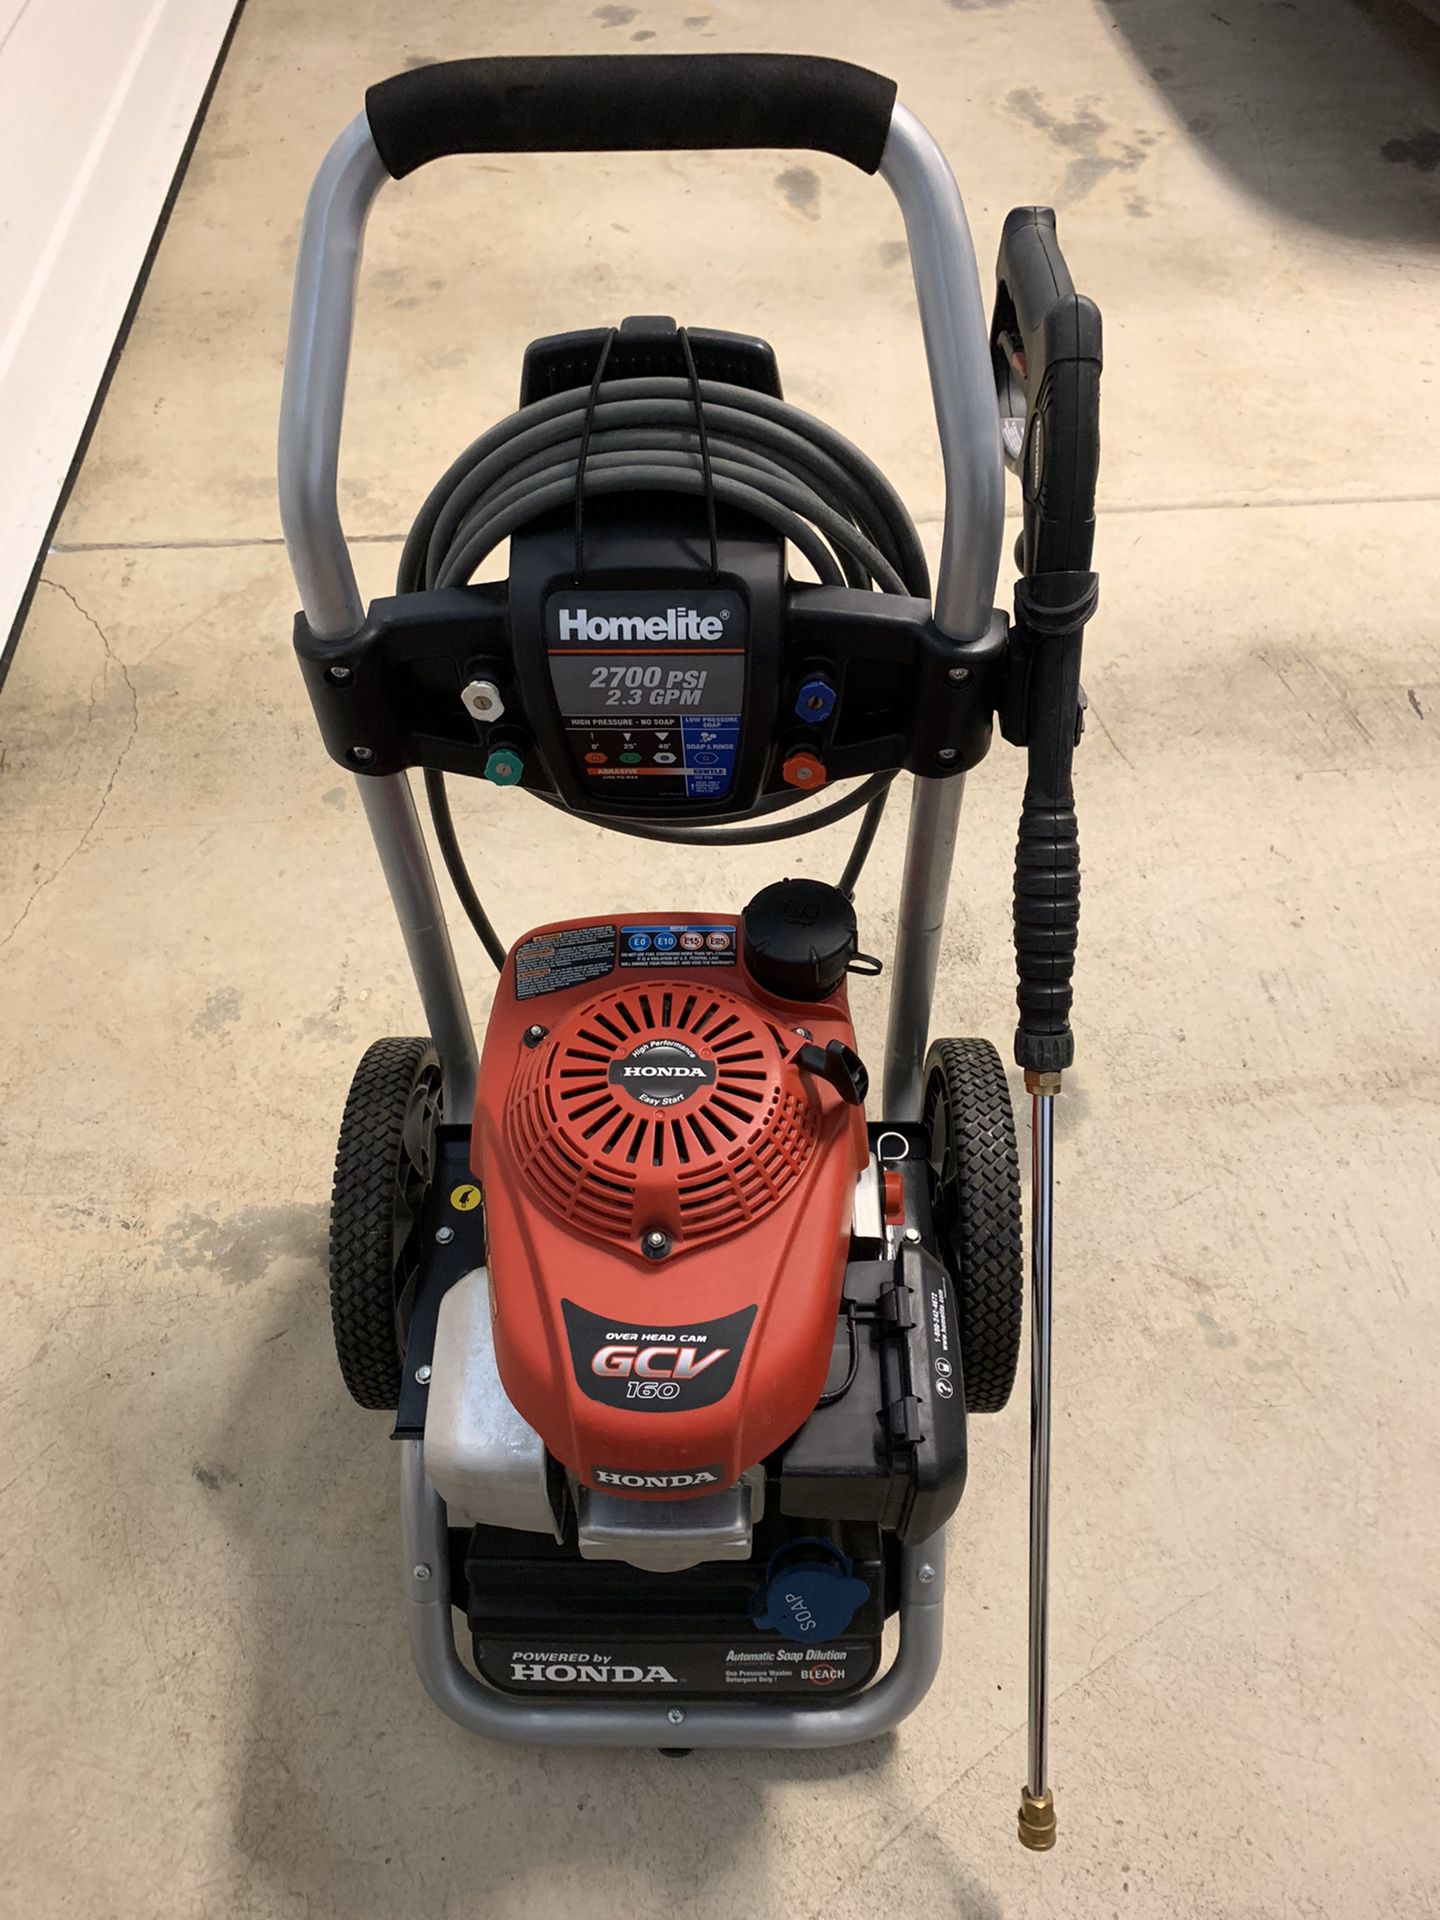 Honda pressure washer - lowballers will be ignored